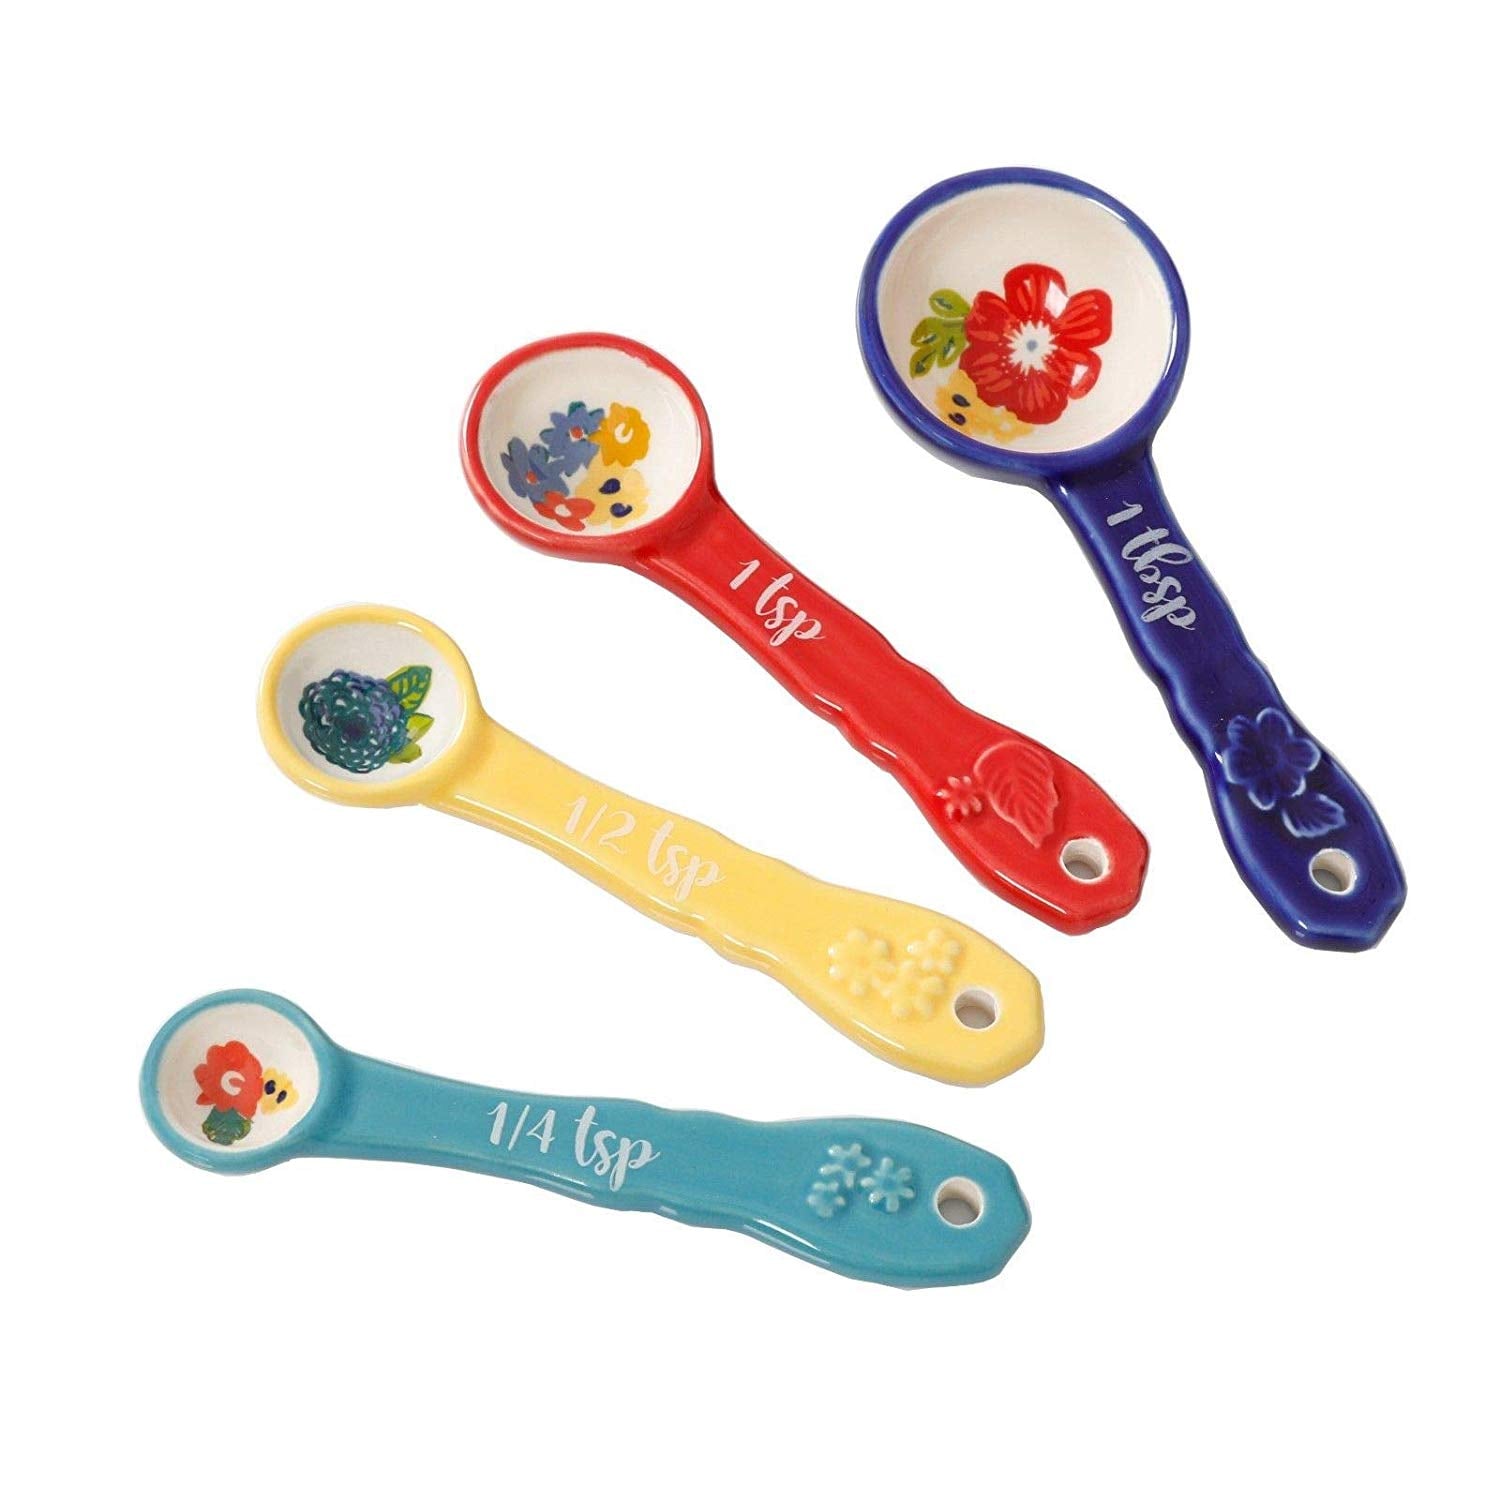 The Cutest Measuring Cups and Spoons on the Market